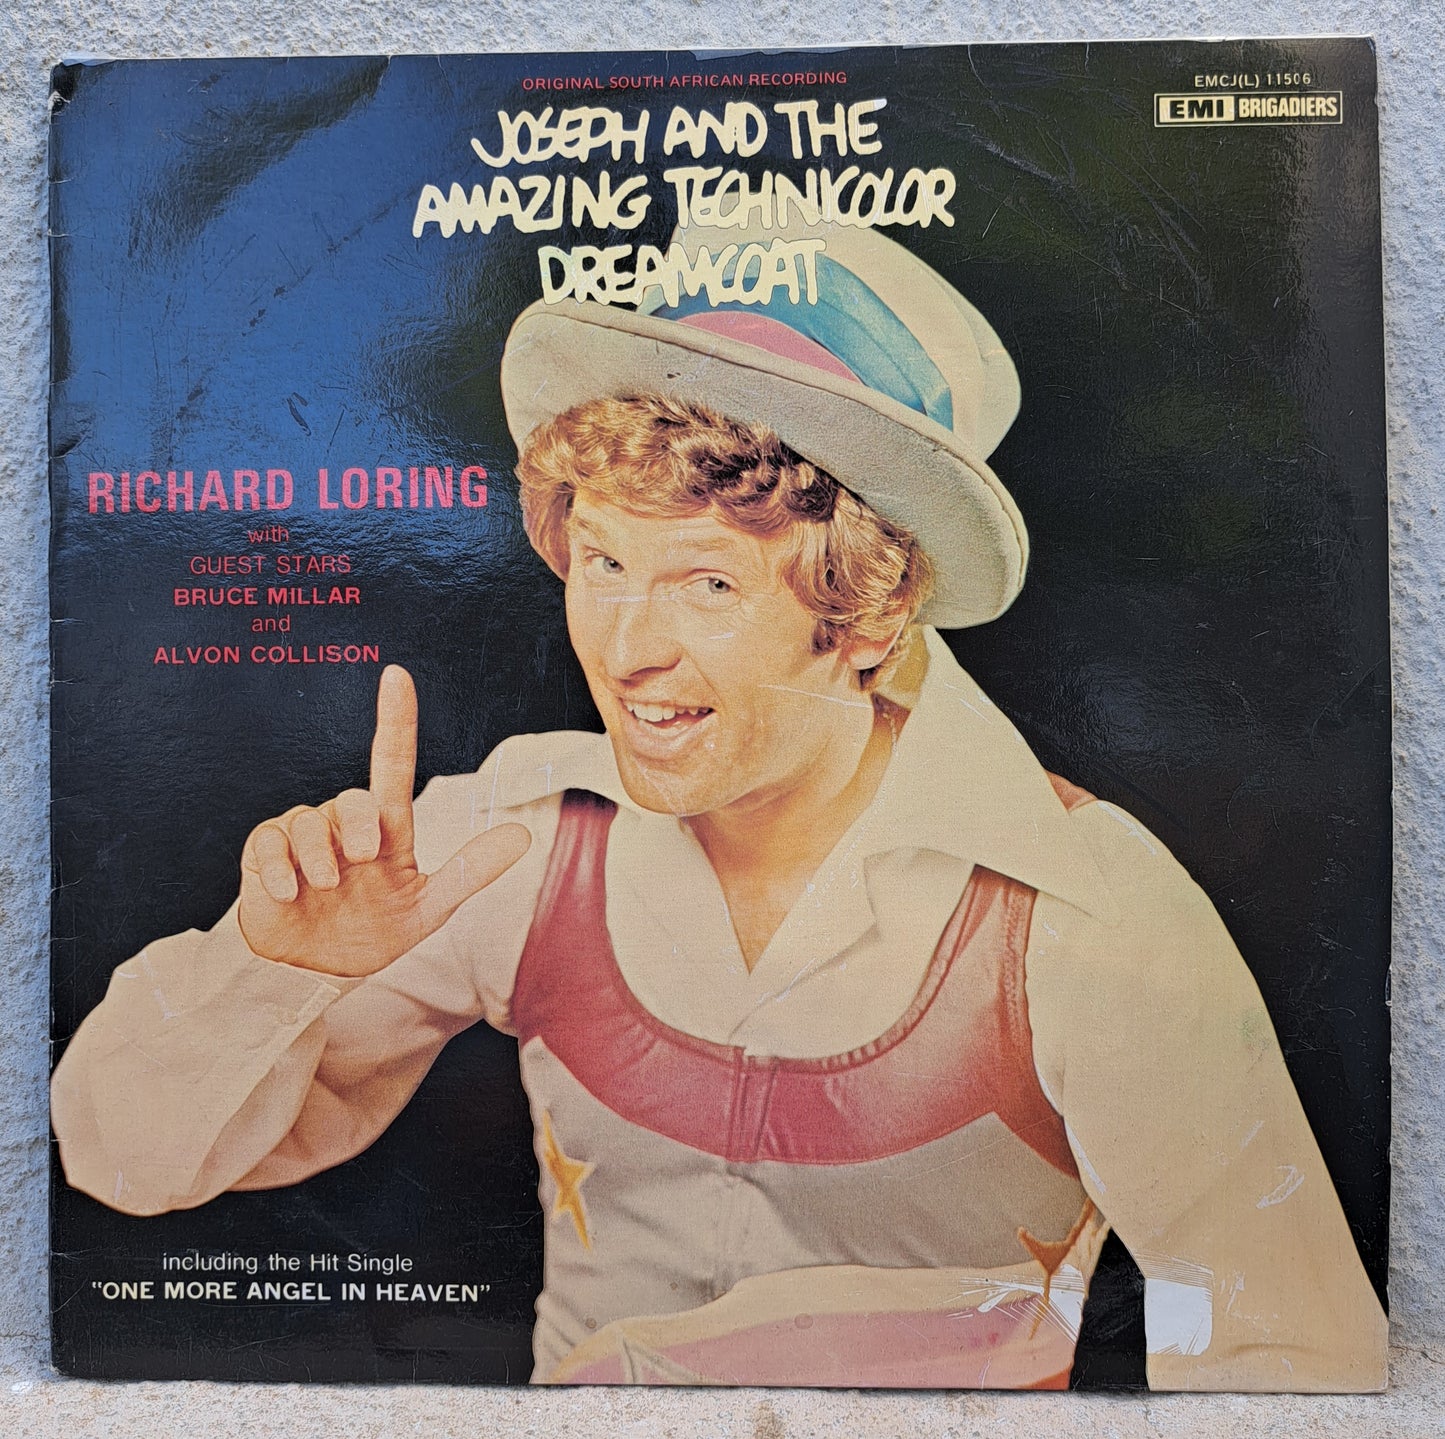 Joseph and the amazing technicolor dreamcoat - Original South African Recording with Richard Loring